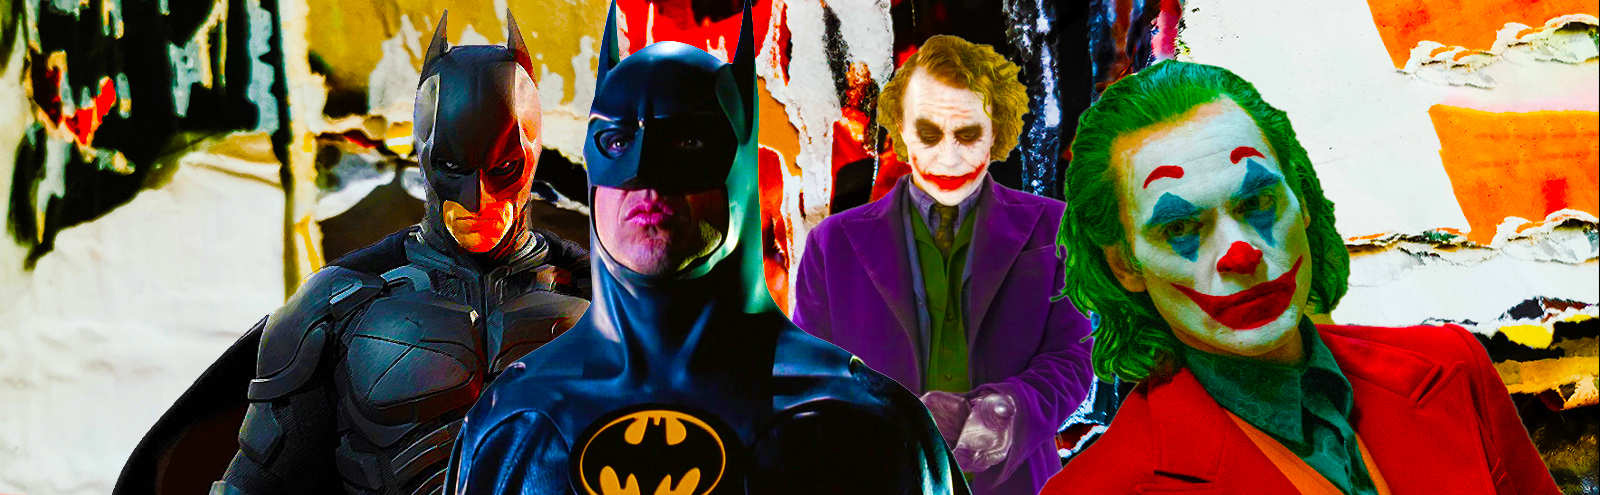 Every Actor Is Either A Batman Or A Joker